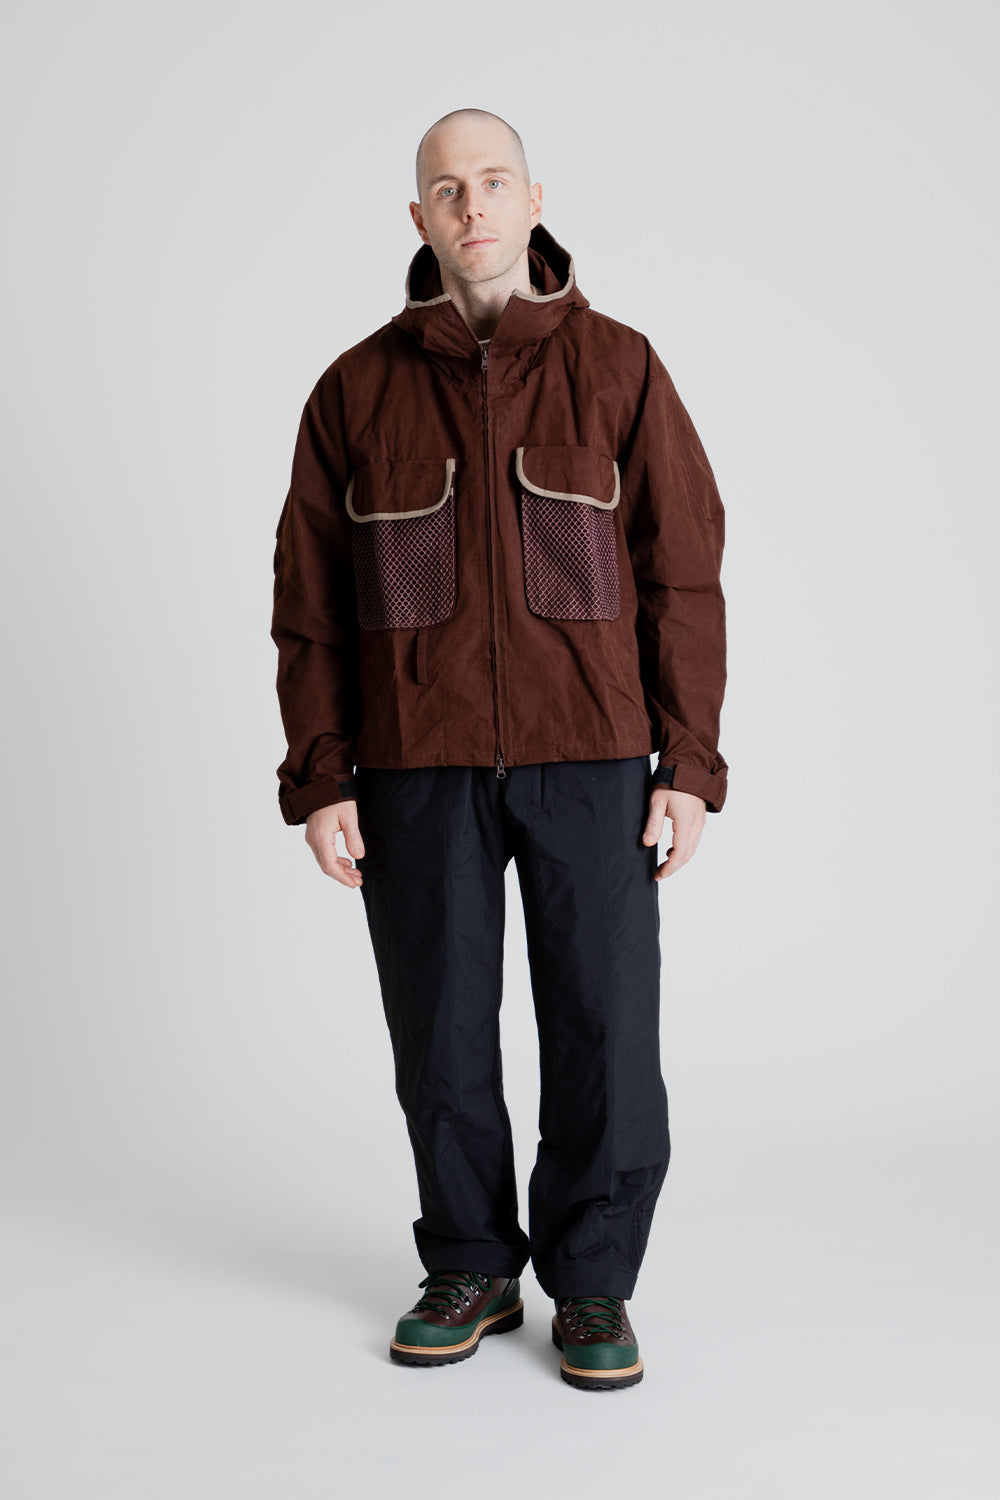 SK Manor Hill Wading Jacket in Brown